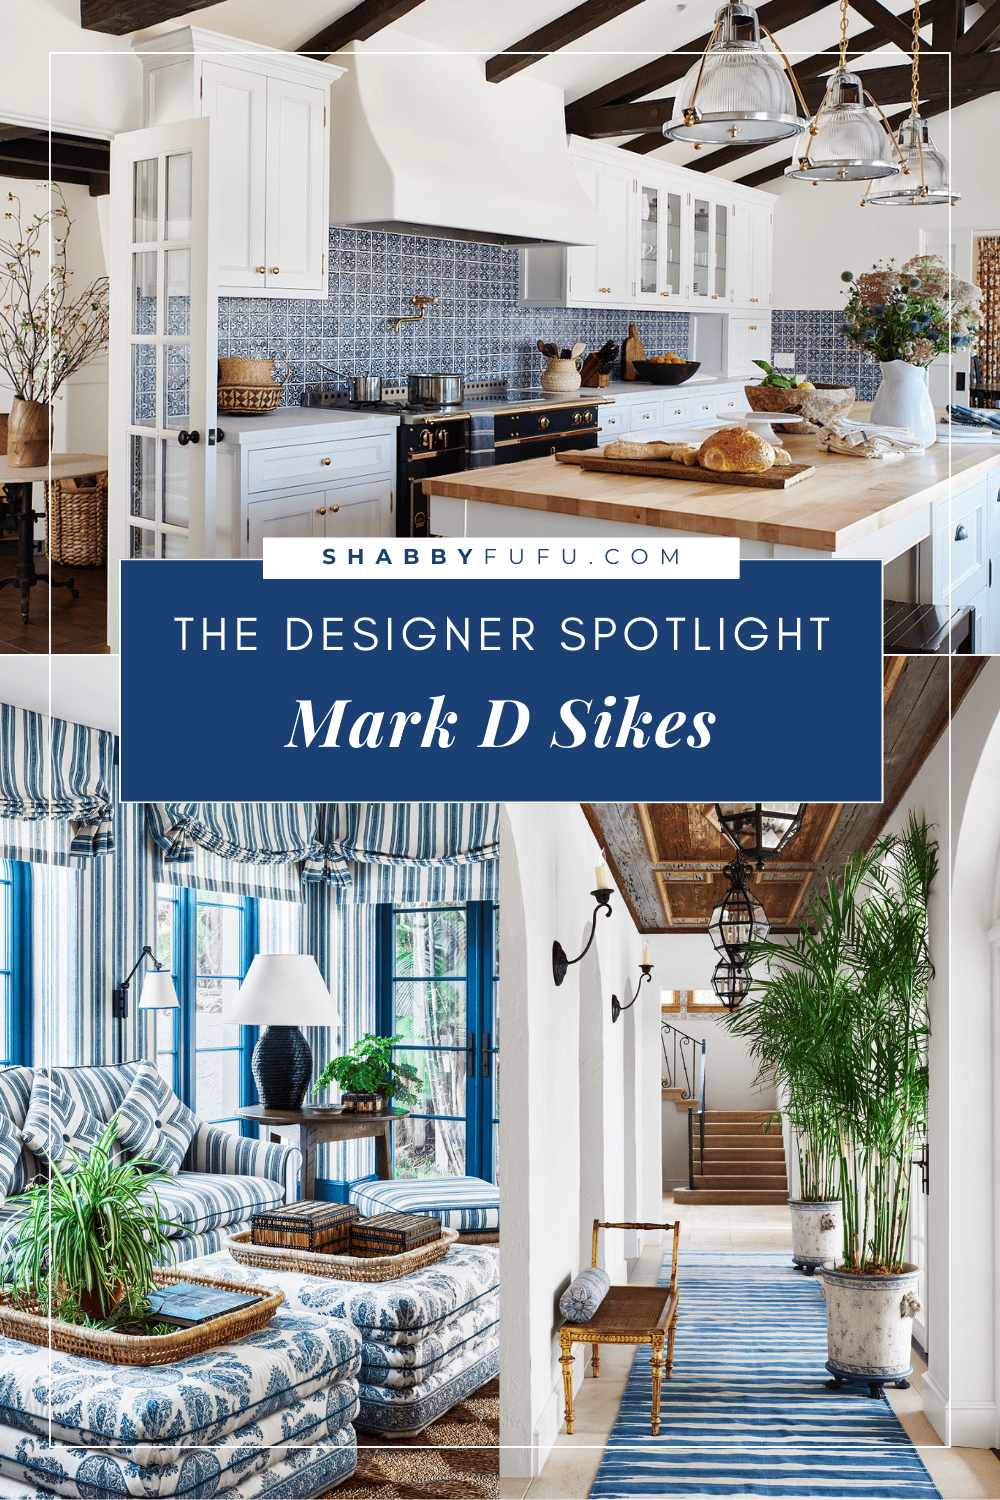 Pinterest decorative graphic featuring new traditional rooms titled "Designer Spotlight - Mark D. Sikes"